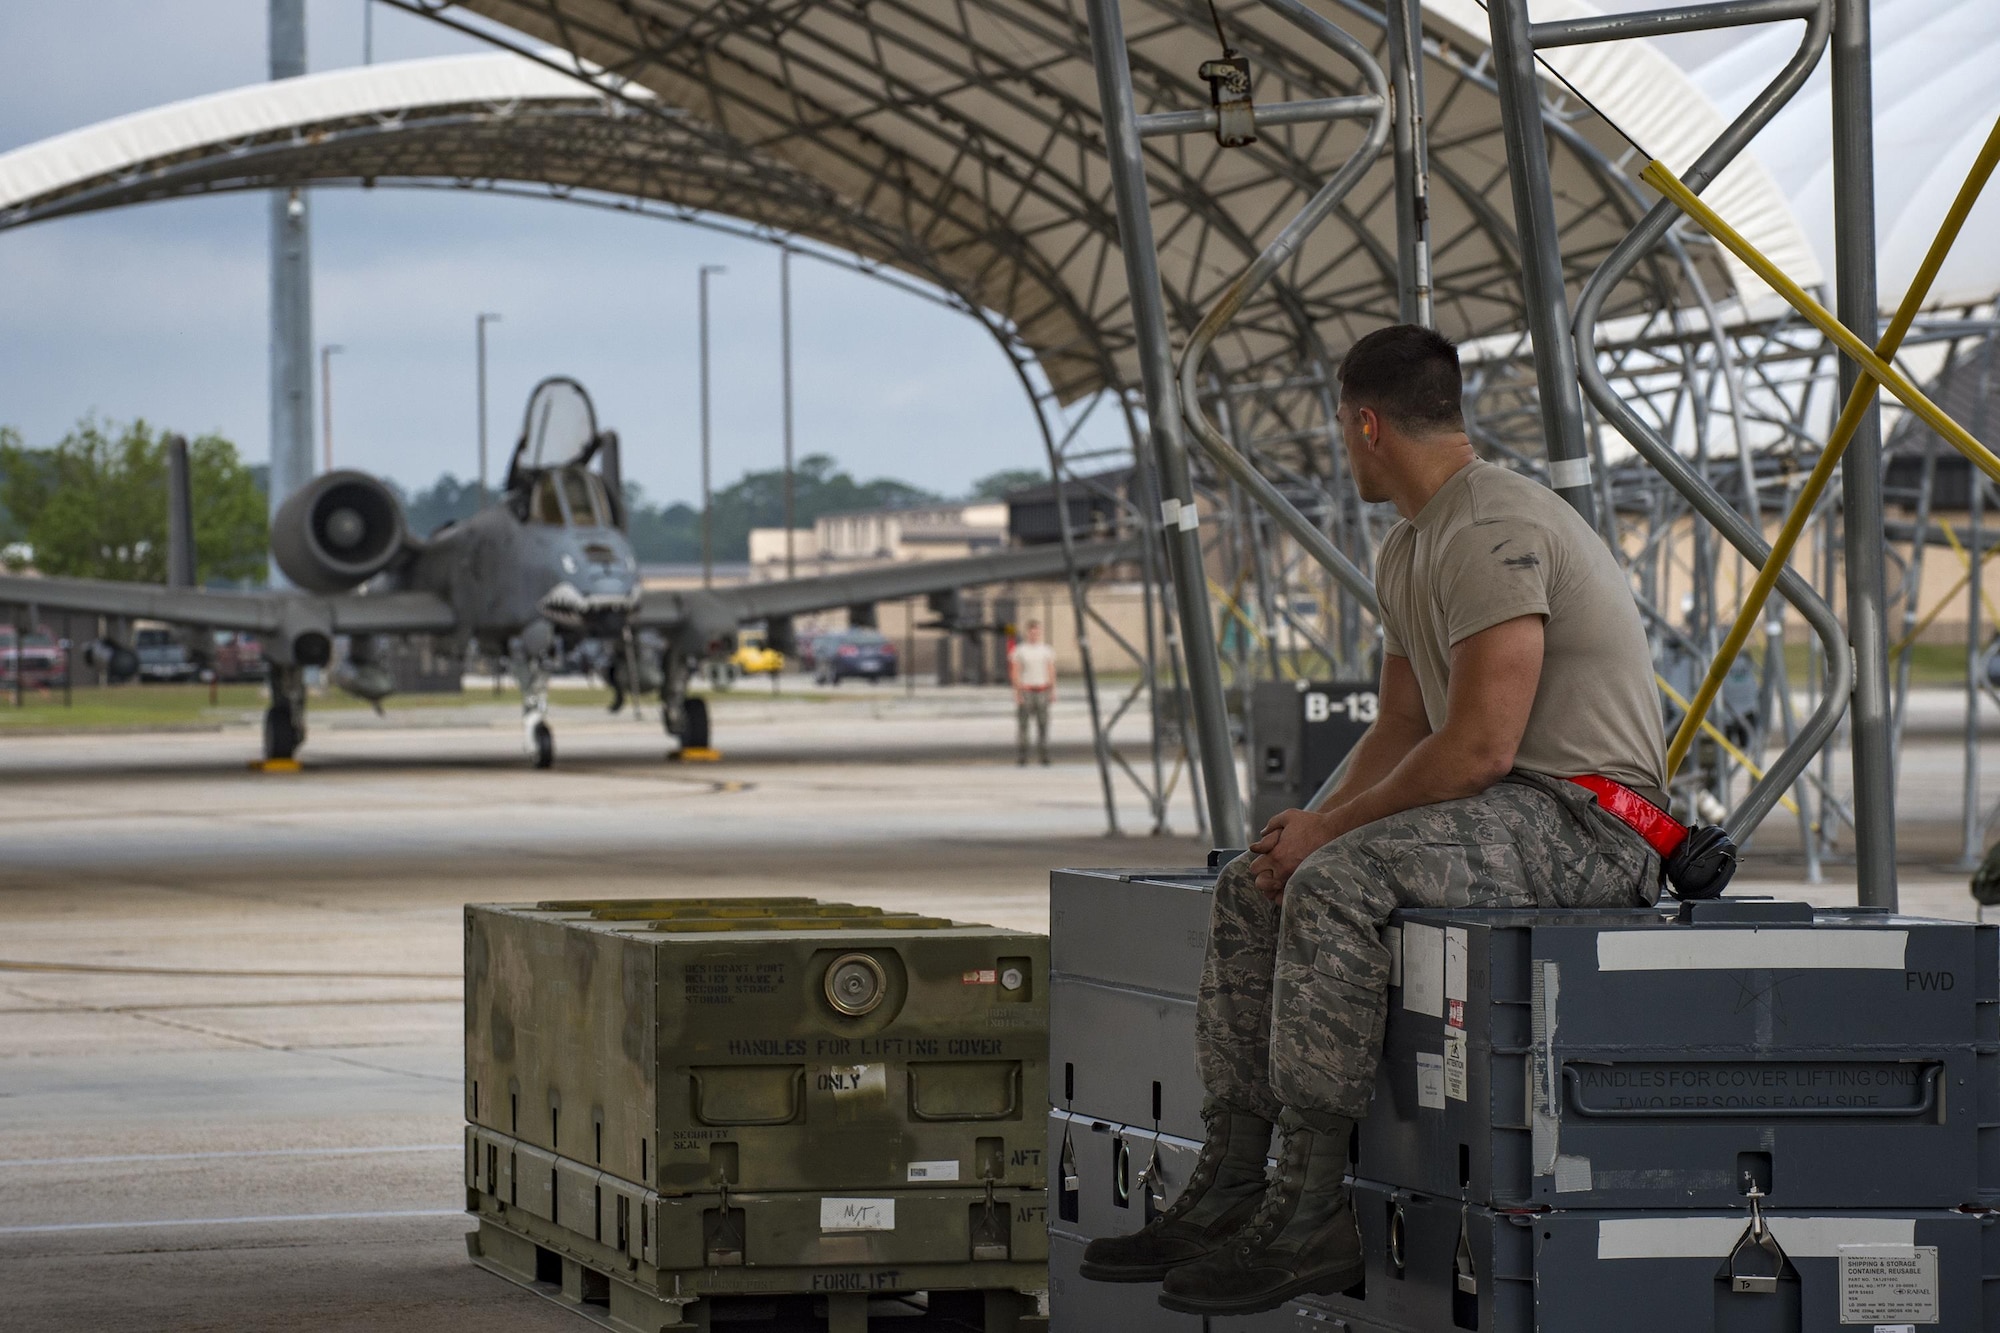 A crew chief from the 75th Aircraft Maintence Unit watches a fellow crew chief prepare to launch an A-10C Thunderbolt II, April 28, 2017 at Moody Air Force Base. The 75th FS departed for Combat Hammer, an air-to-ground exercise hosted at Hill Air Force Base, Utah. The exercise is designed to collect and analyze data on the performance of precision weapons and measure their suitability for use in combat. (U.S. Air Force photo by Andrea Jenkins)